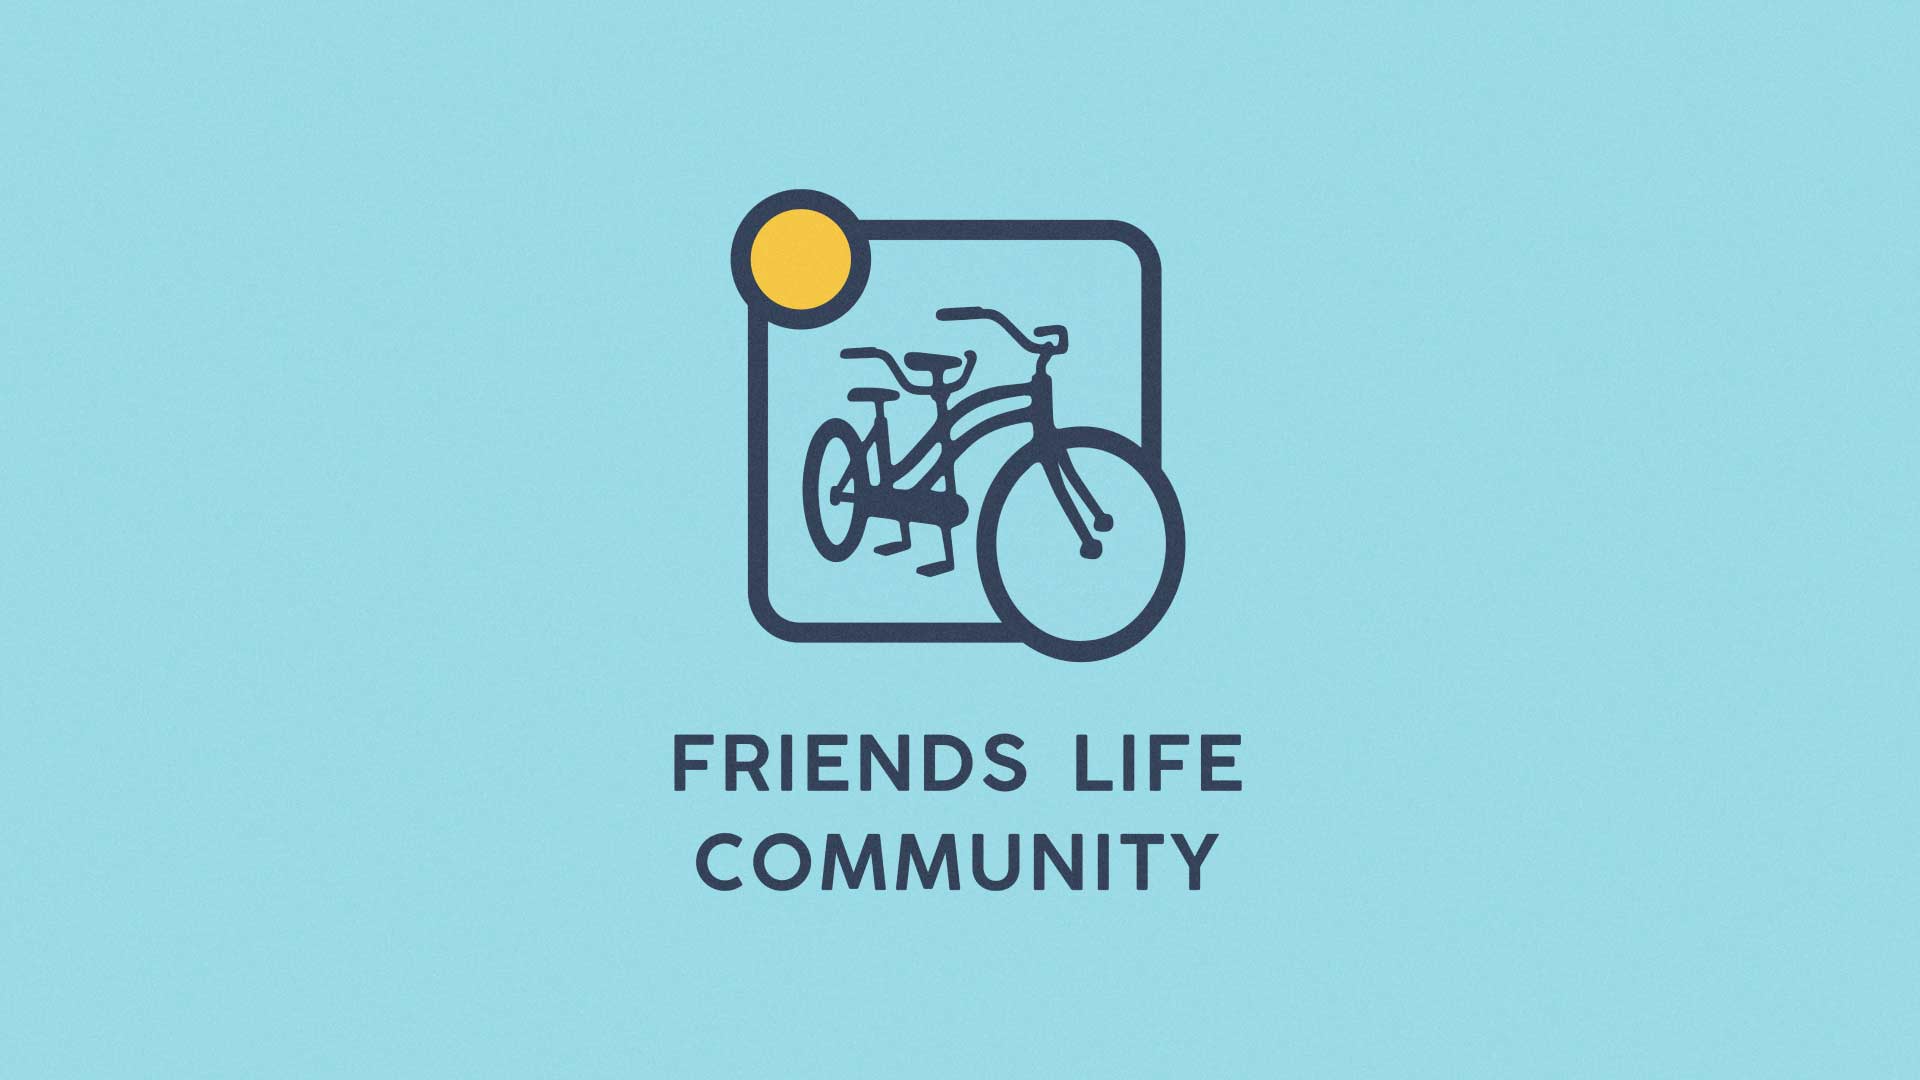 FLC logo showing an illustrated blue bicycle with a yellow sun on top of a light blue background